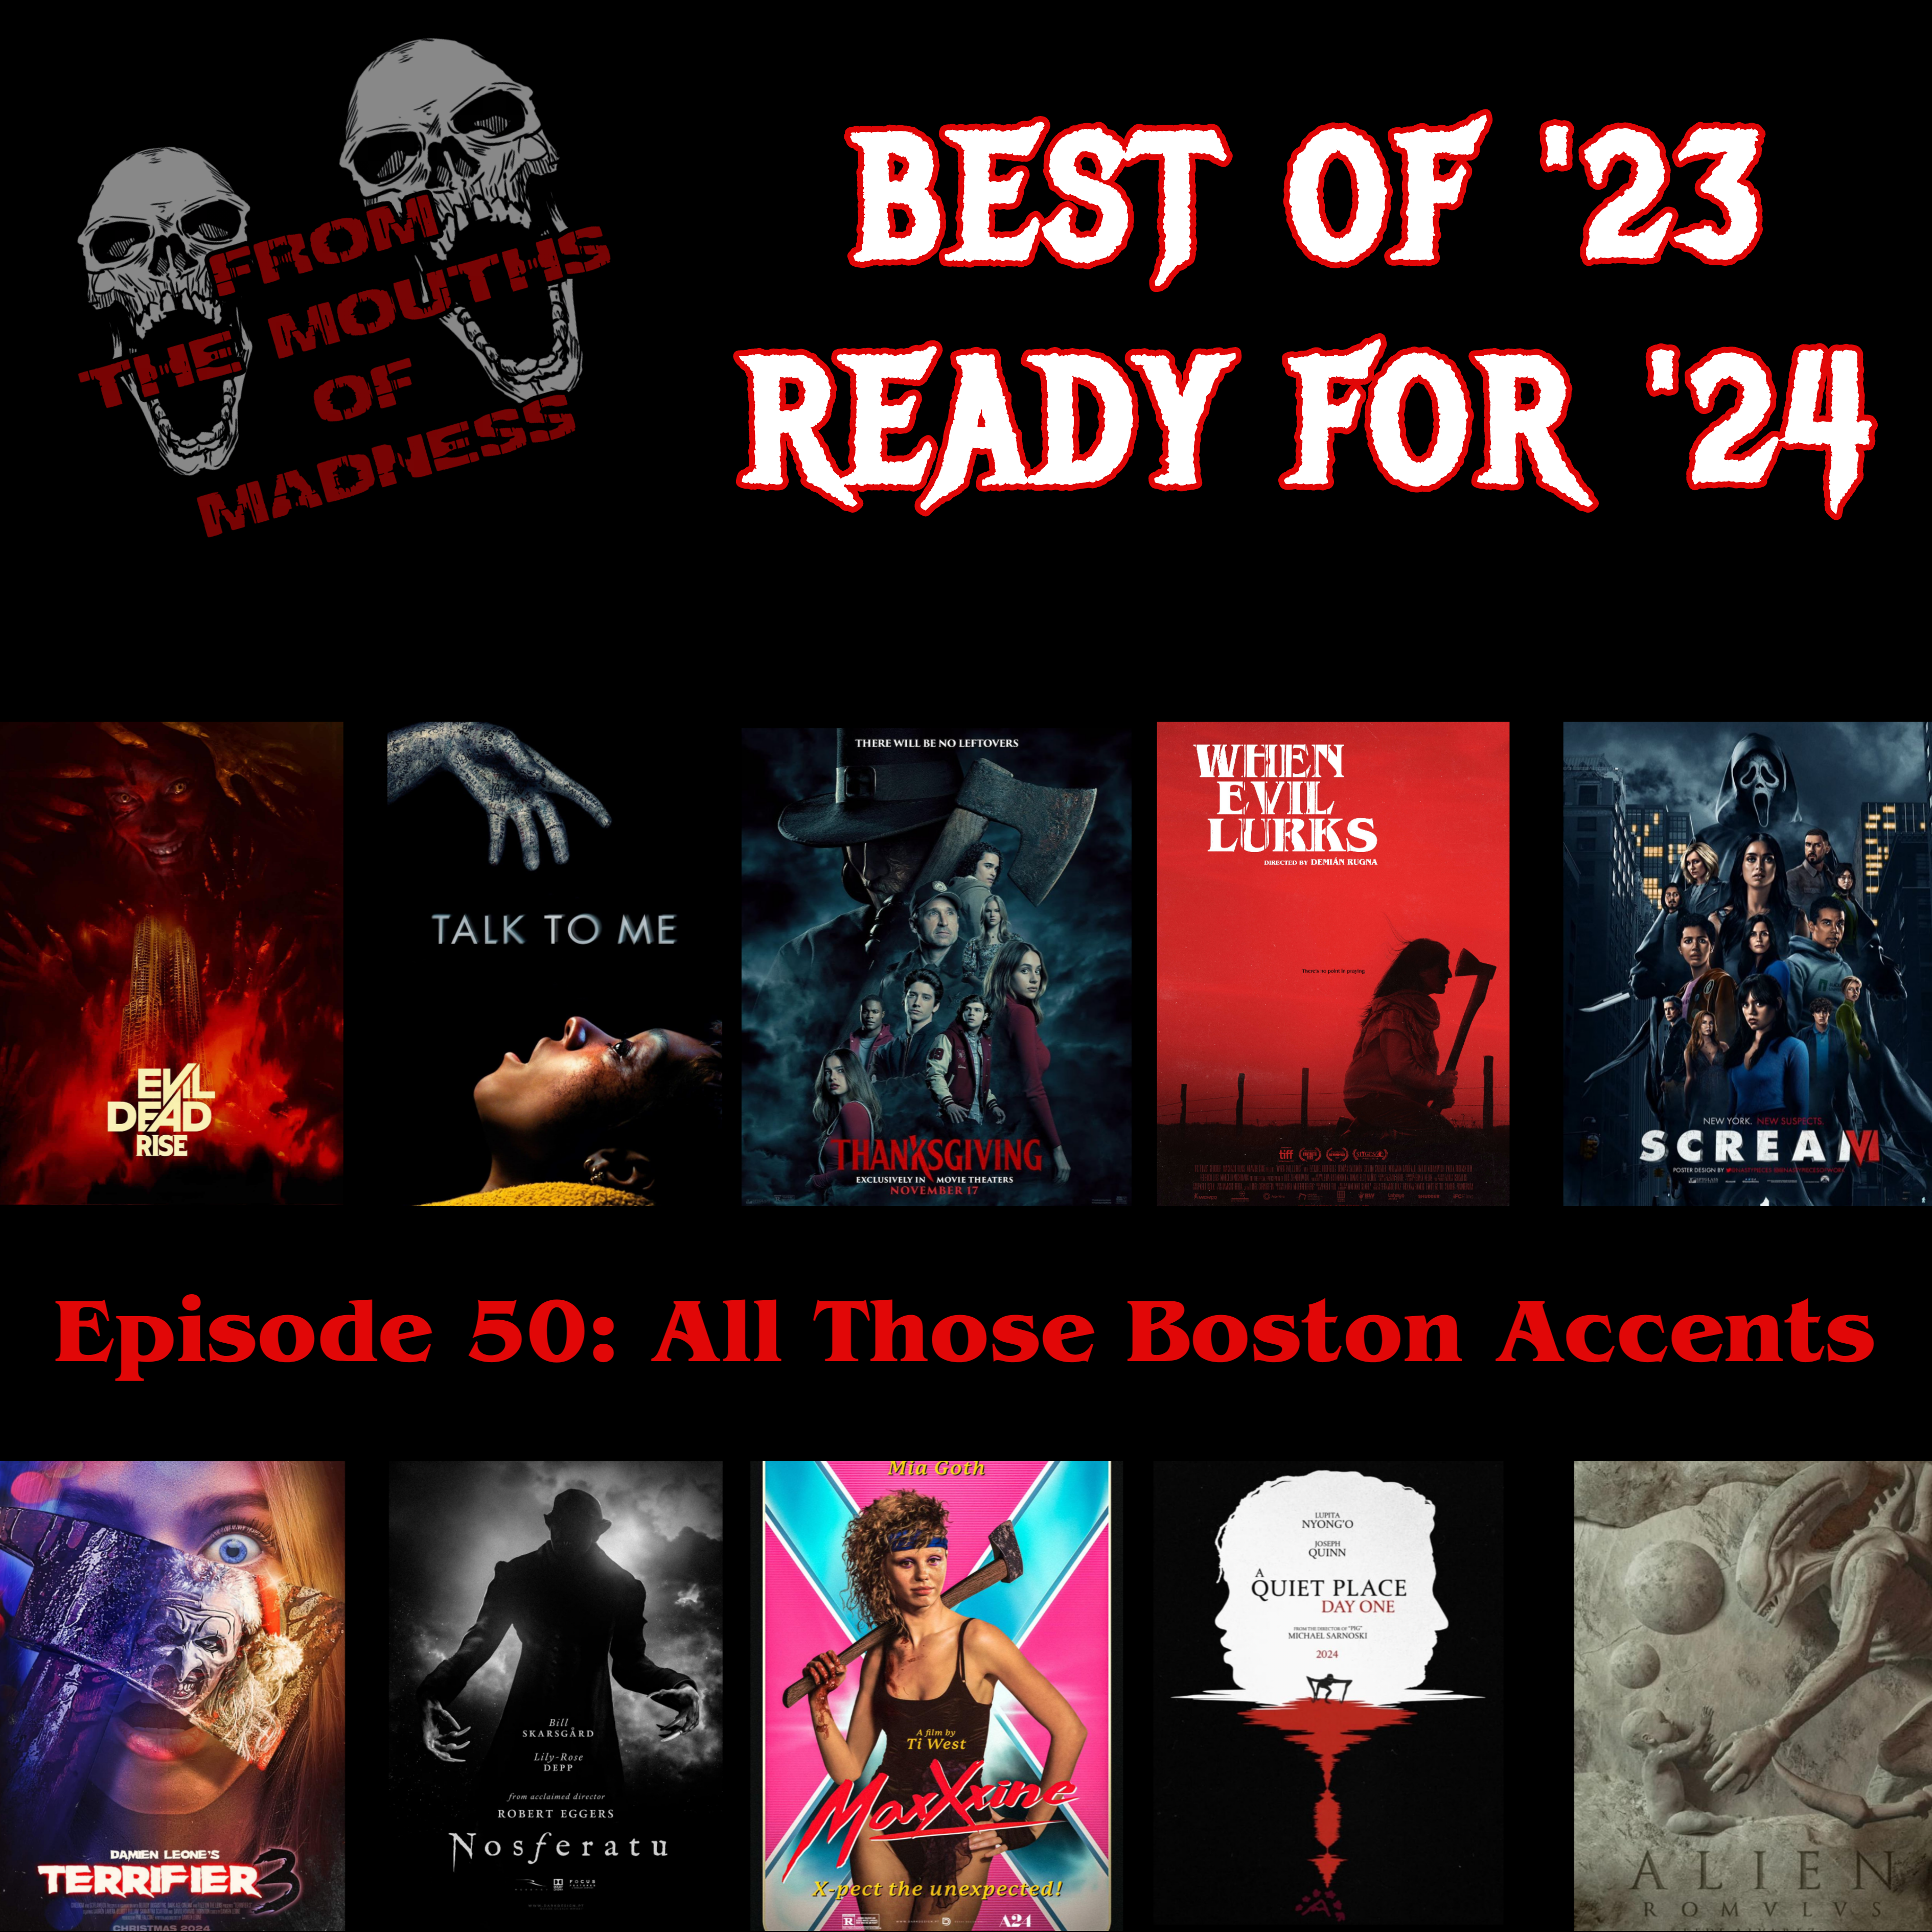 Best of ’23/Ready for ’24: All Those Boston Accents